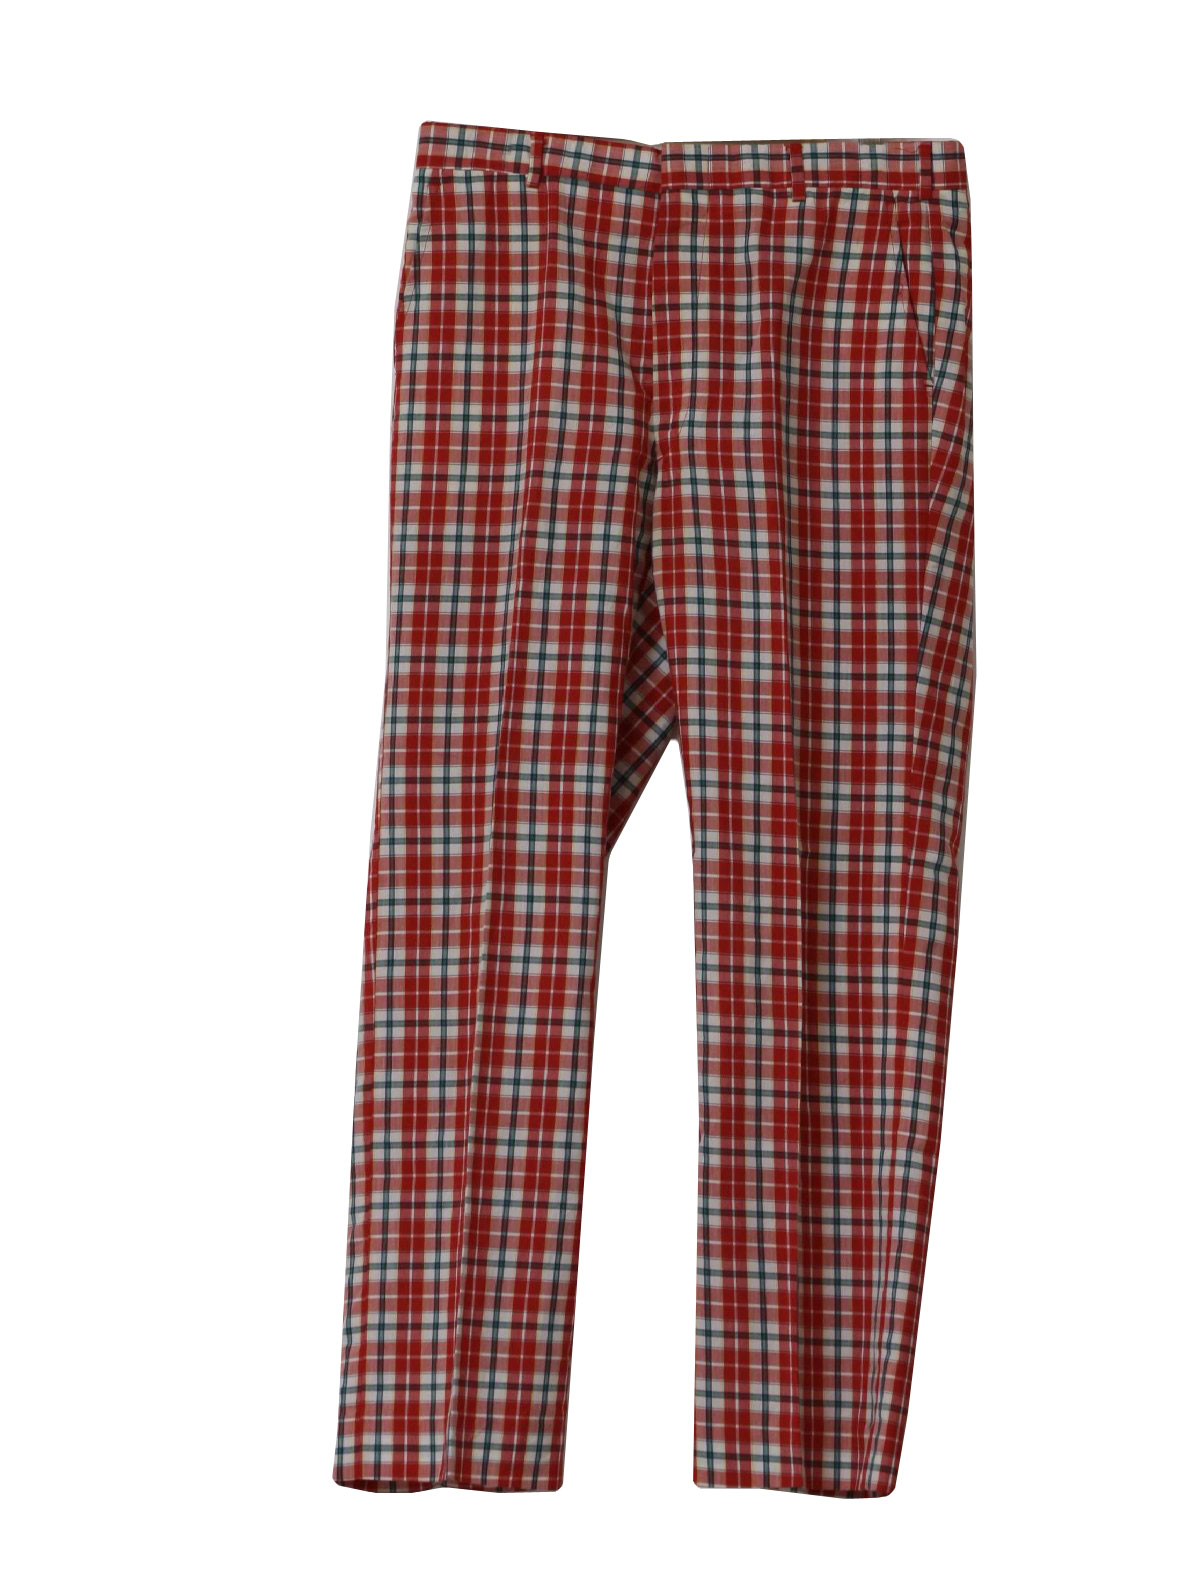 1970's Pants (Izod): 70s -Izod- Mens red, green, yellow and white plaid ...